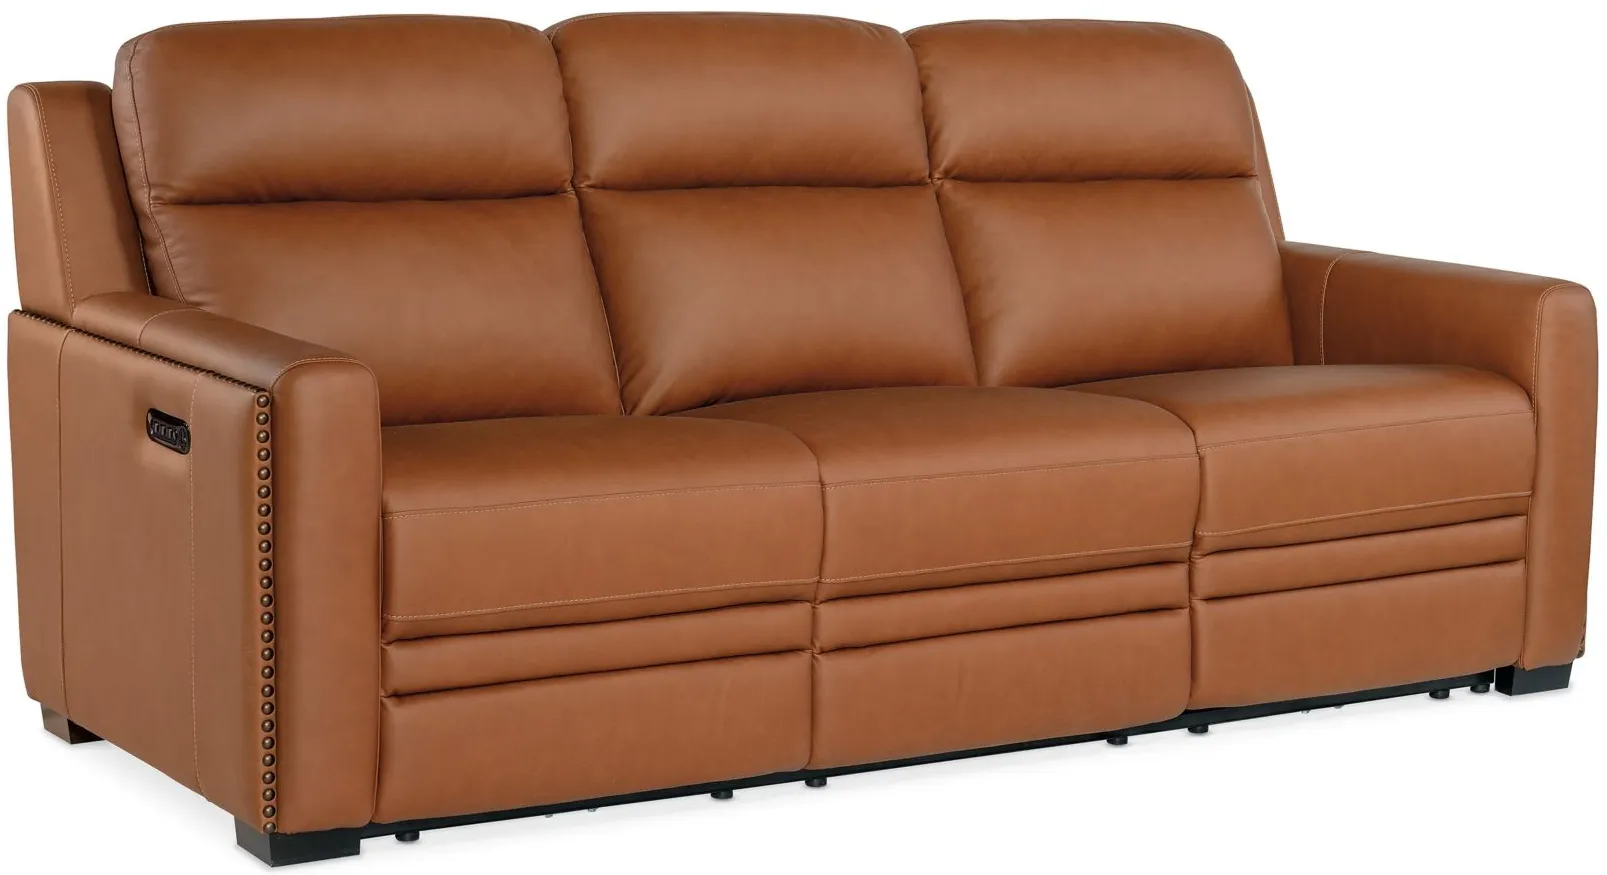 McKinley Power Sofa in Candid Spice by Hooker Furniture